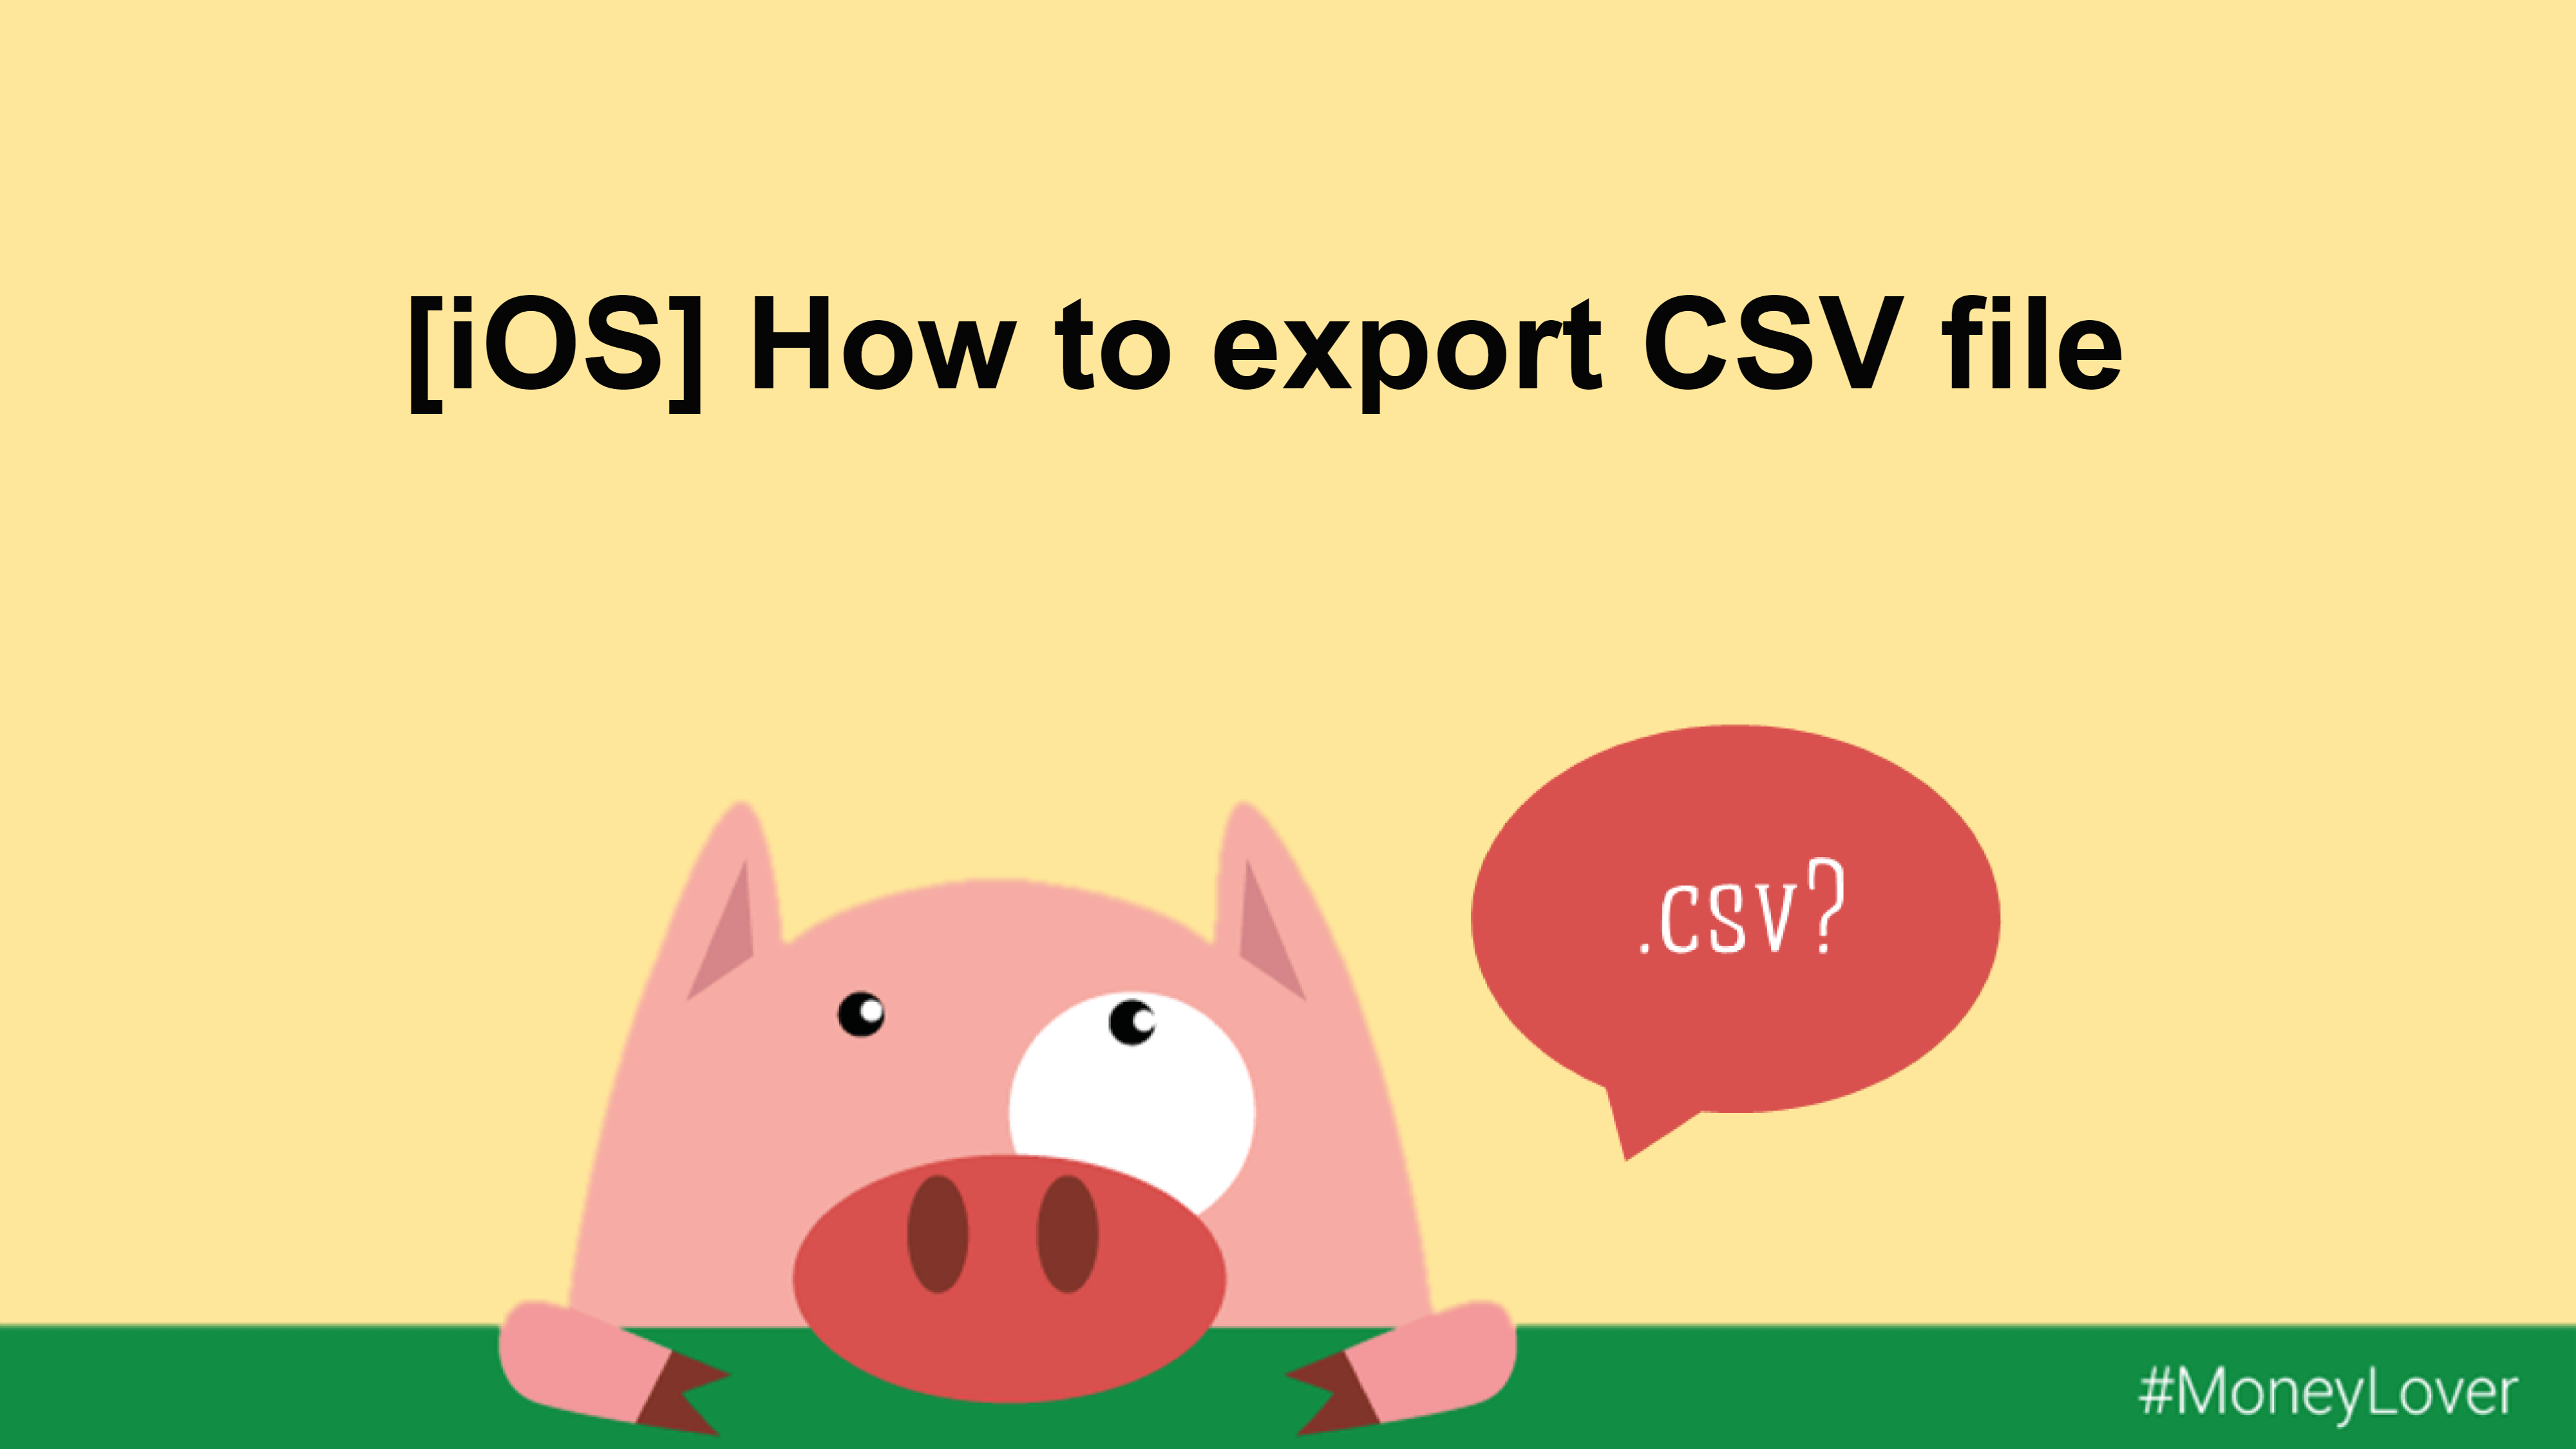 [iOS] How to export CSV file